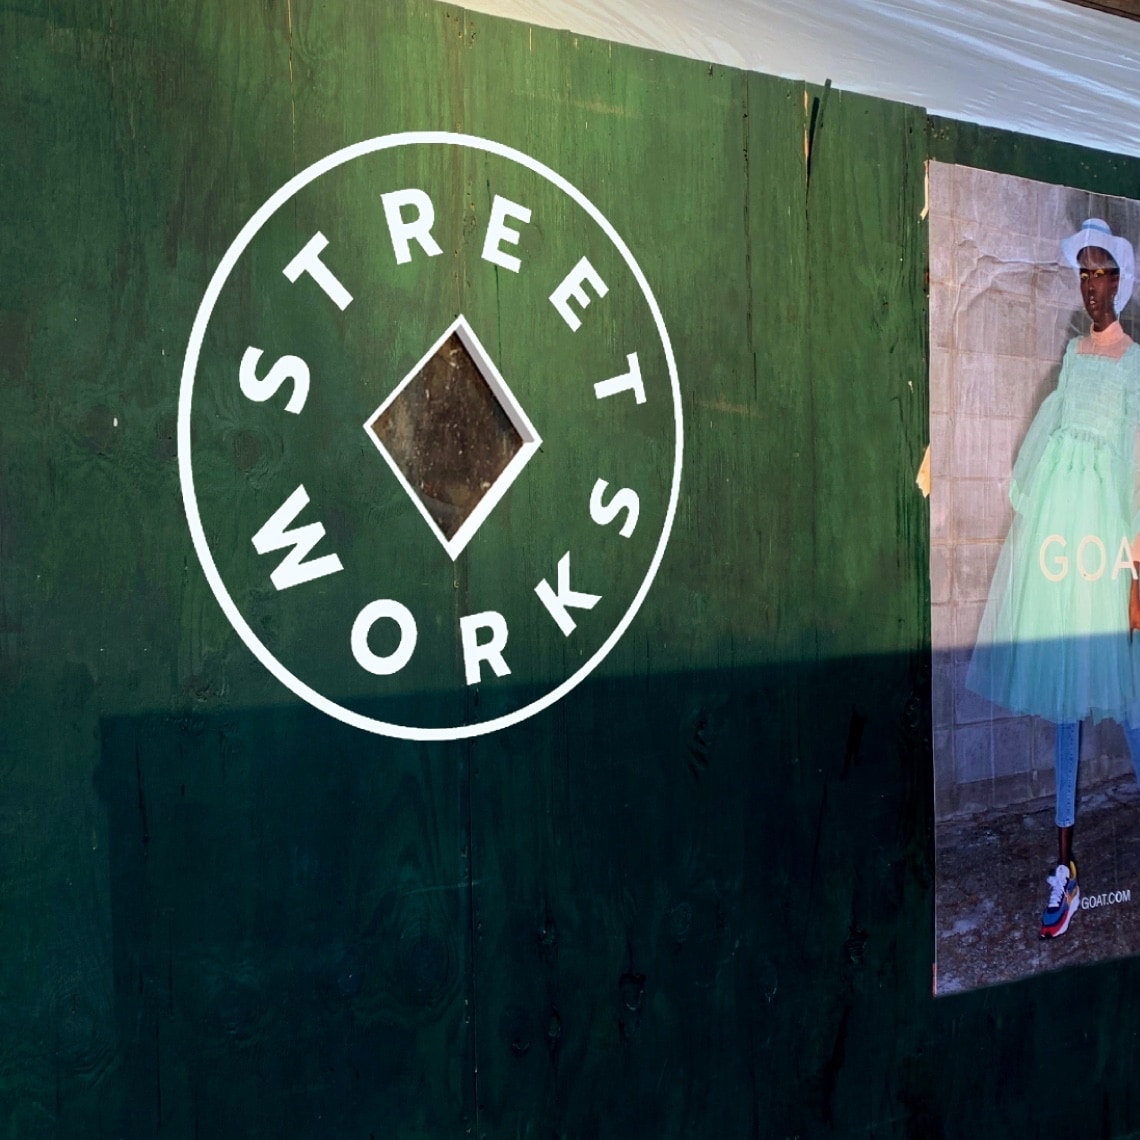 A green wall with the image of a woman and the Street Works logo applied to it